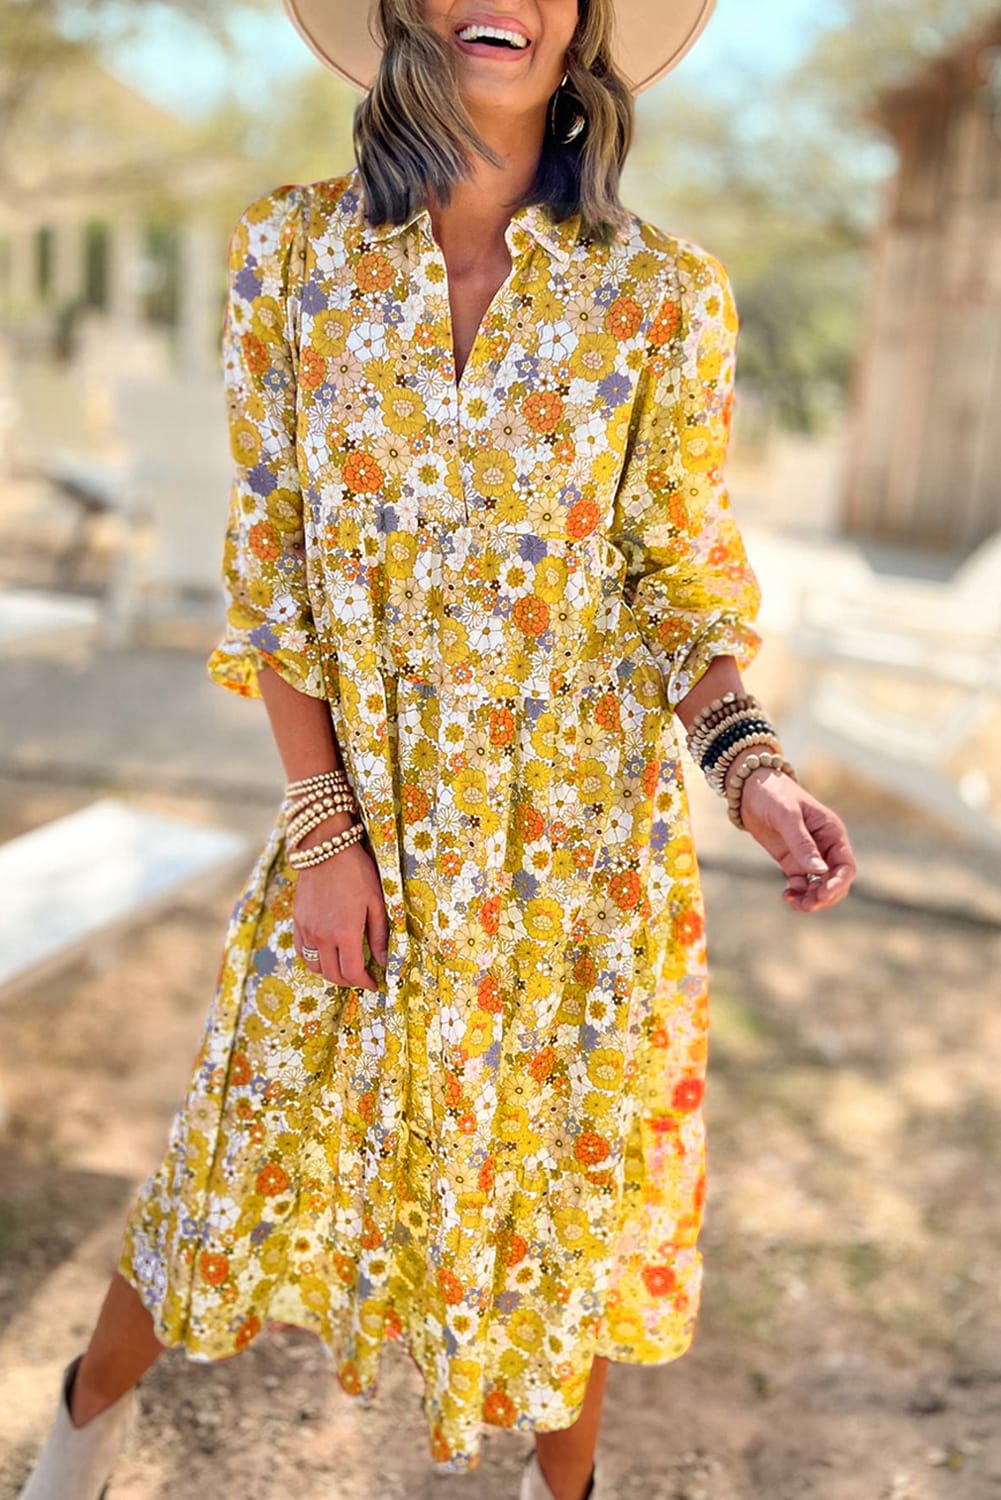 Multicolor Boho Floral Collared Long Sleeve Dress